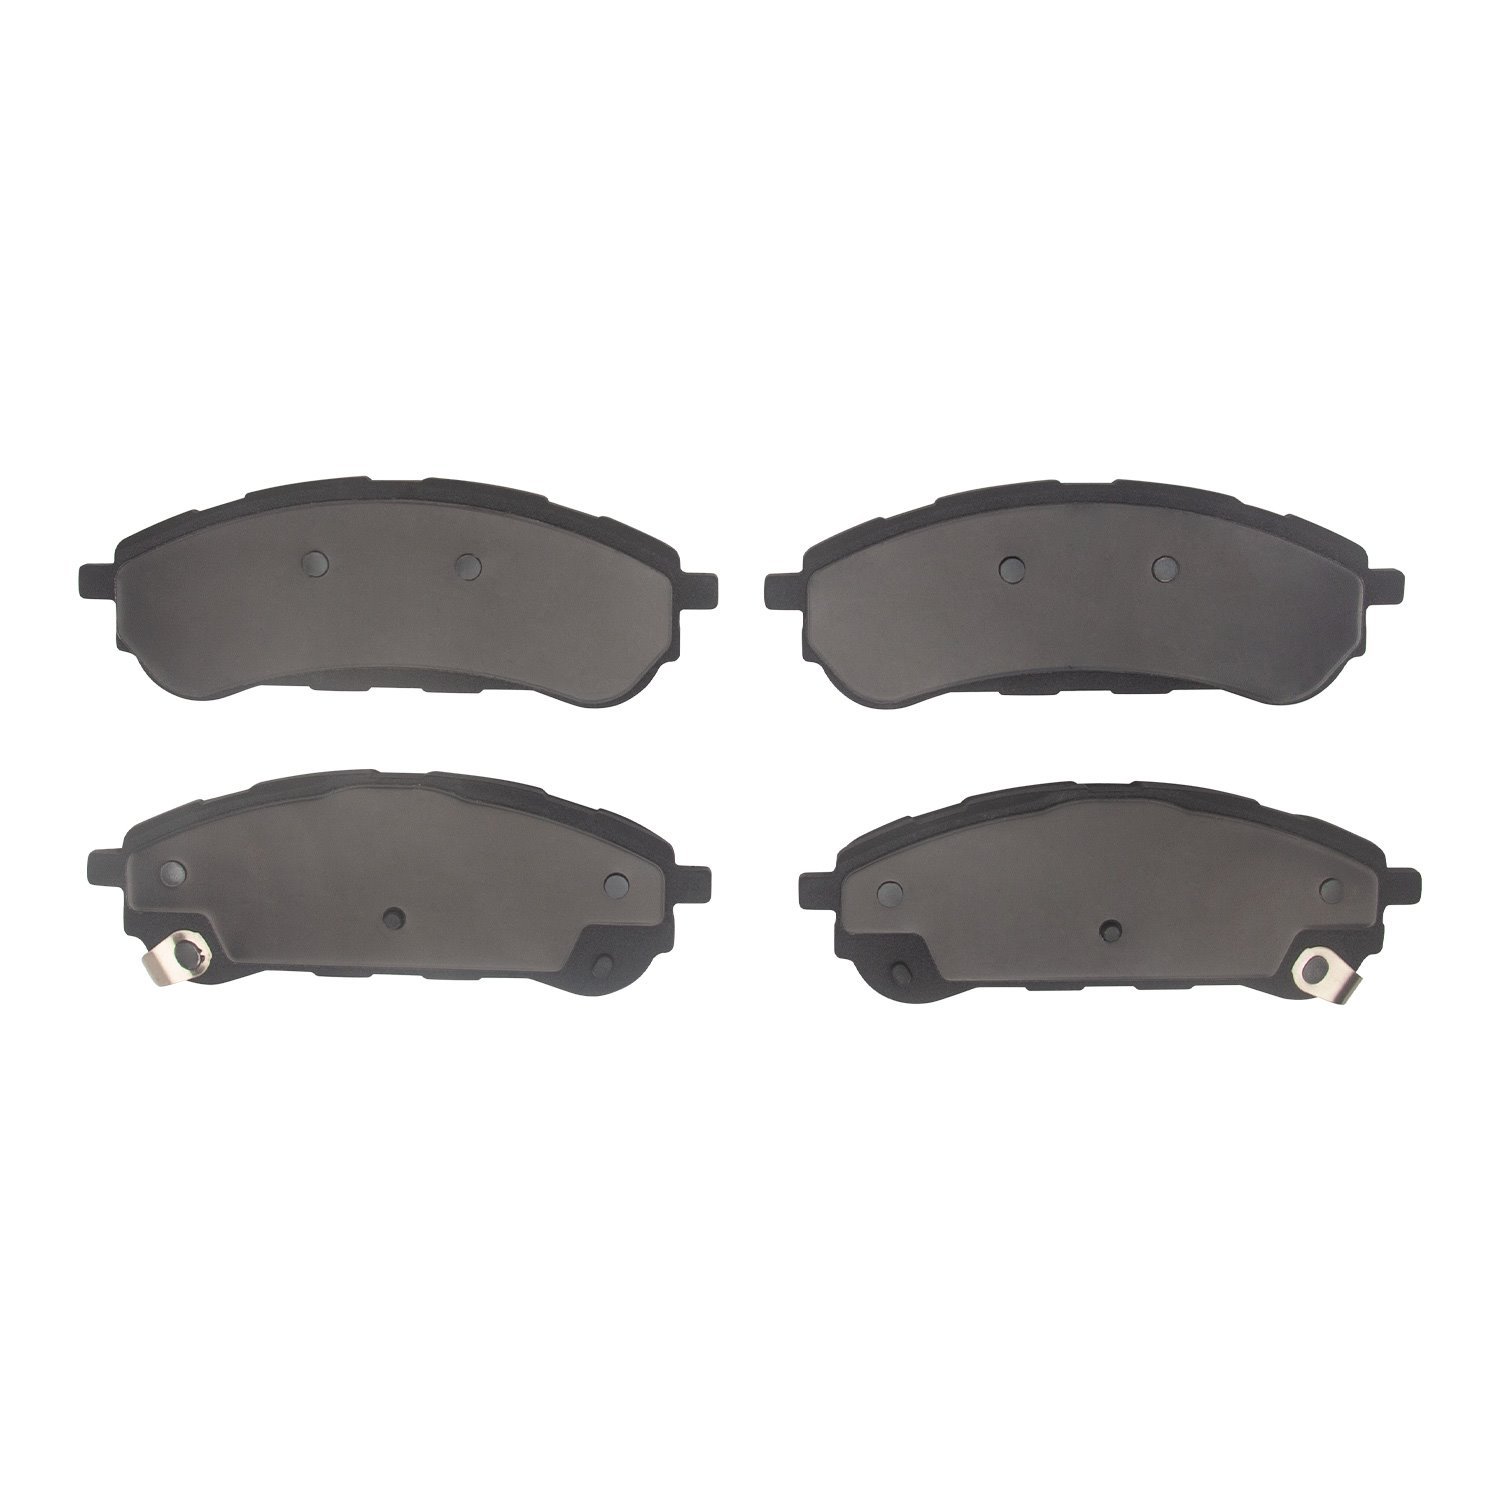 1551-2208-00 5000 Advanced Ceramic Brake Pads, Fits Select Ford/Lincoln/Mercury/Mazda, Position: Rear